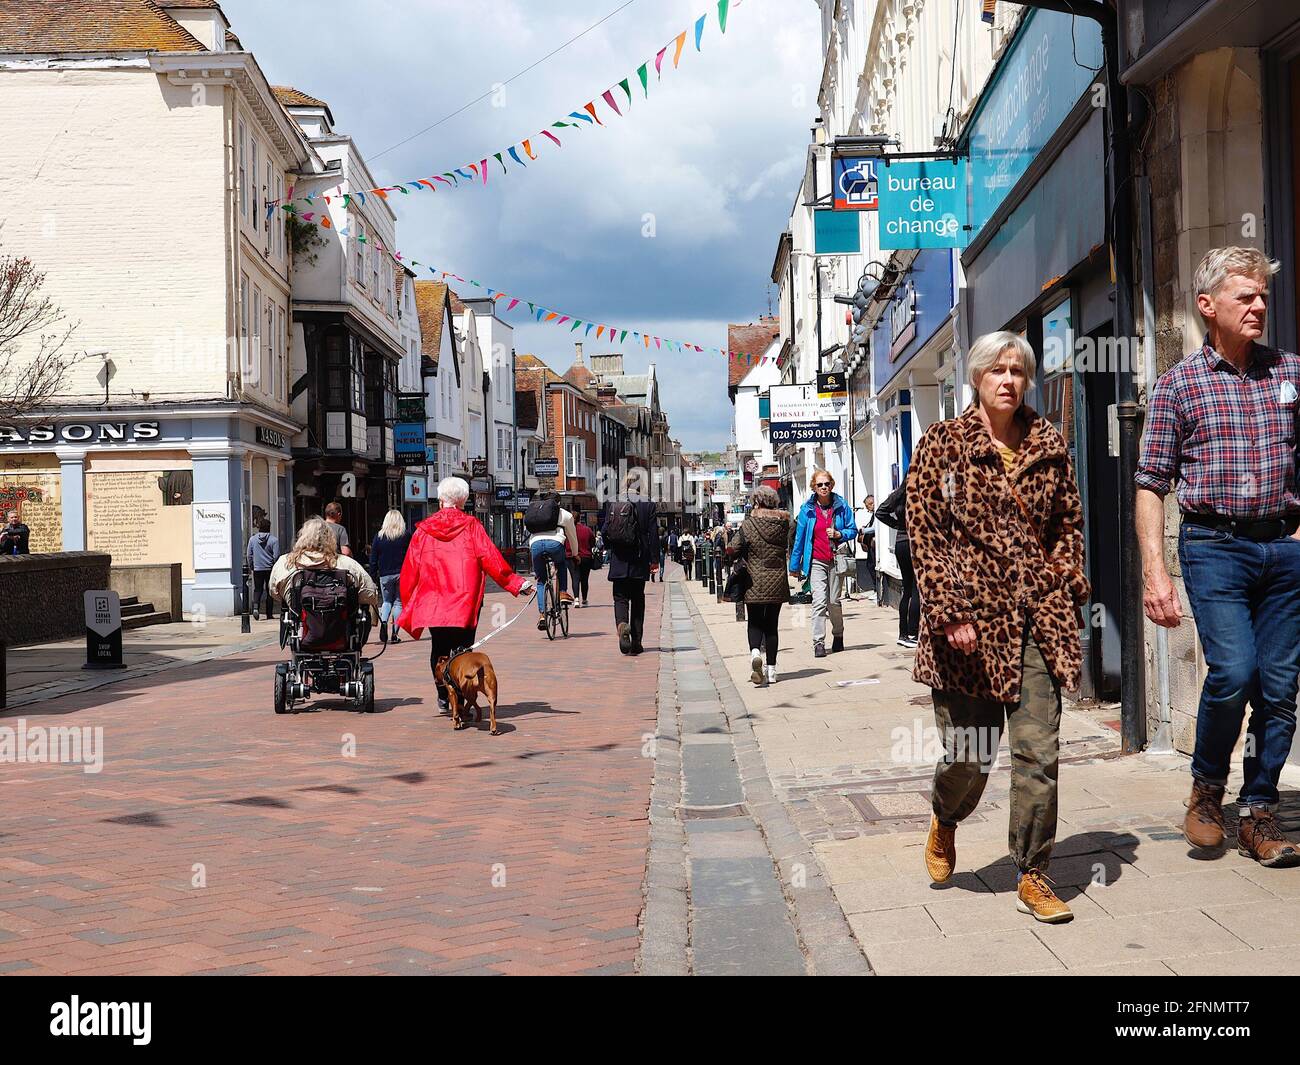 Canterbury, Kent, UK. 18 May, 2021. The Kent town of Canterbury has the highest cases of the Indian variant of COVID-19 in the South East, ranking 32nd in England. Photo Credit: Paul Lawrenson /Alamy Live News Stock Photo